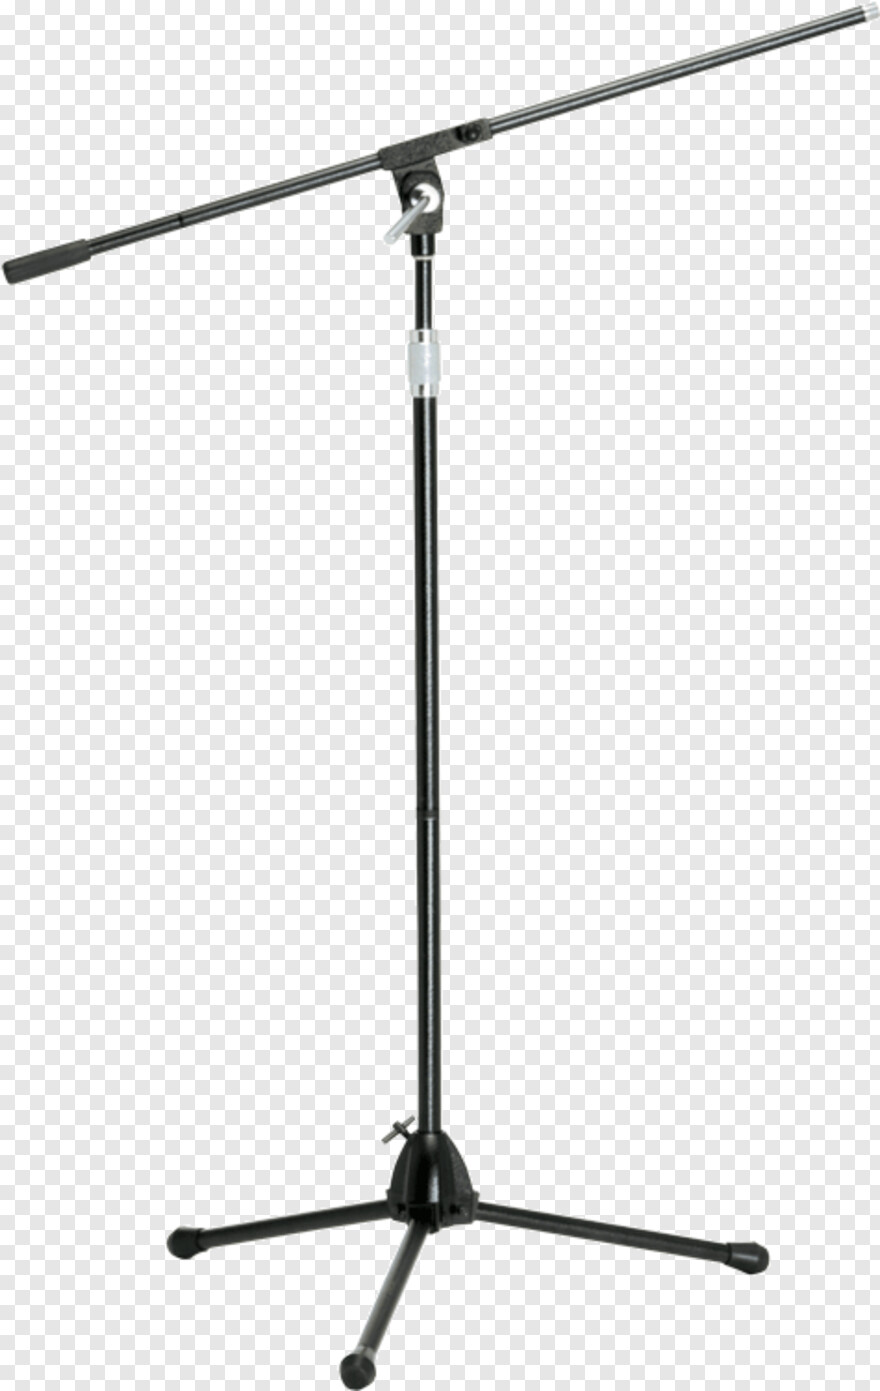 microphone-stand # 692239